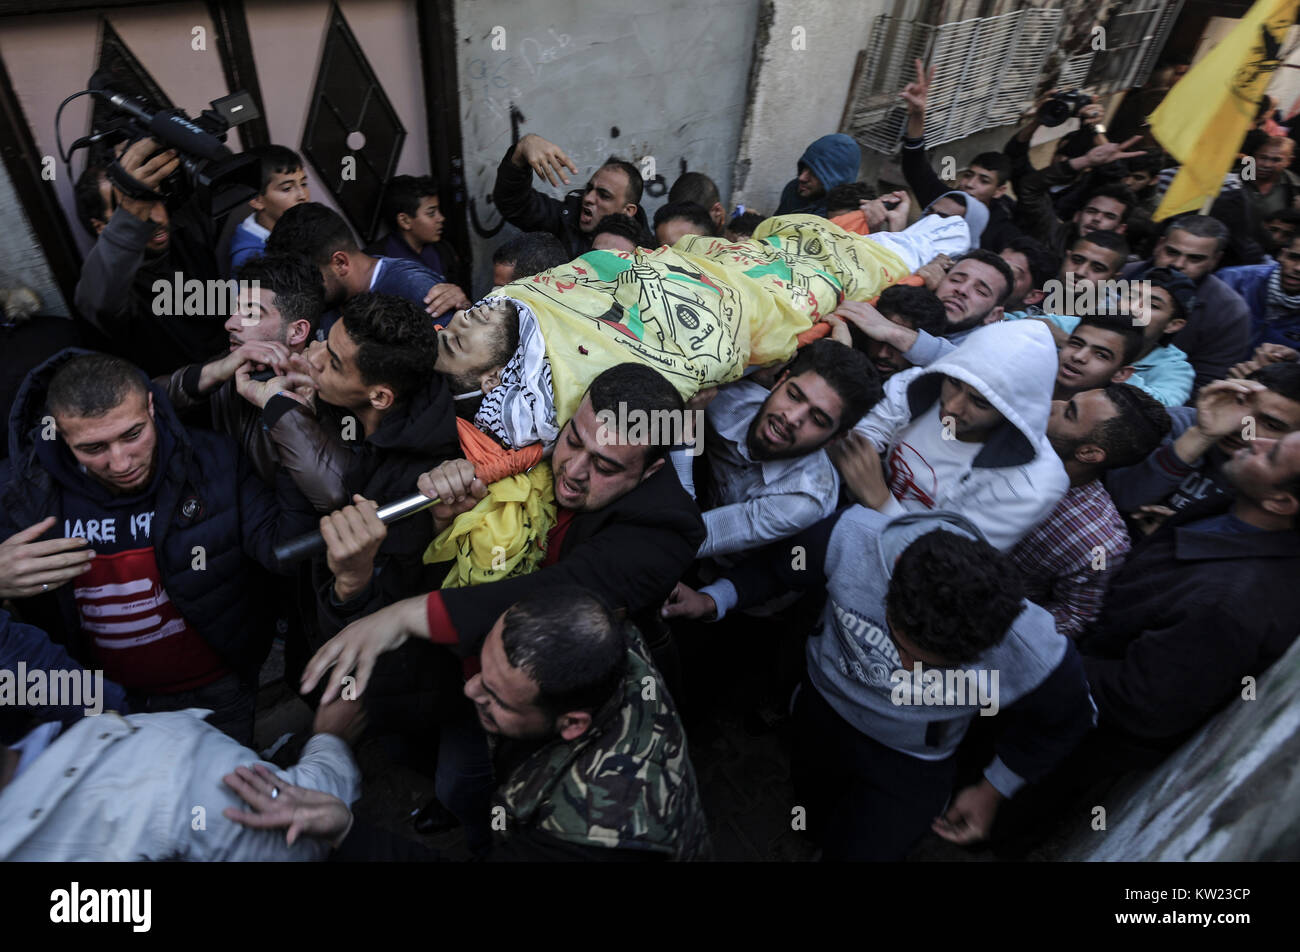 Relatives carry the body of Jamal Mohammed Masleh, 20, who killed during clashes betwen Palestinian protesters and Israeli troops on Friday, during his funeral at AL-Maghazi refugee camp in Gaza, 30 December 2017. Photo: Wissam Nassar/dpa Stock Photo